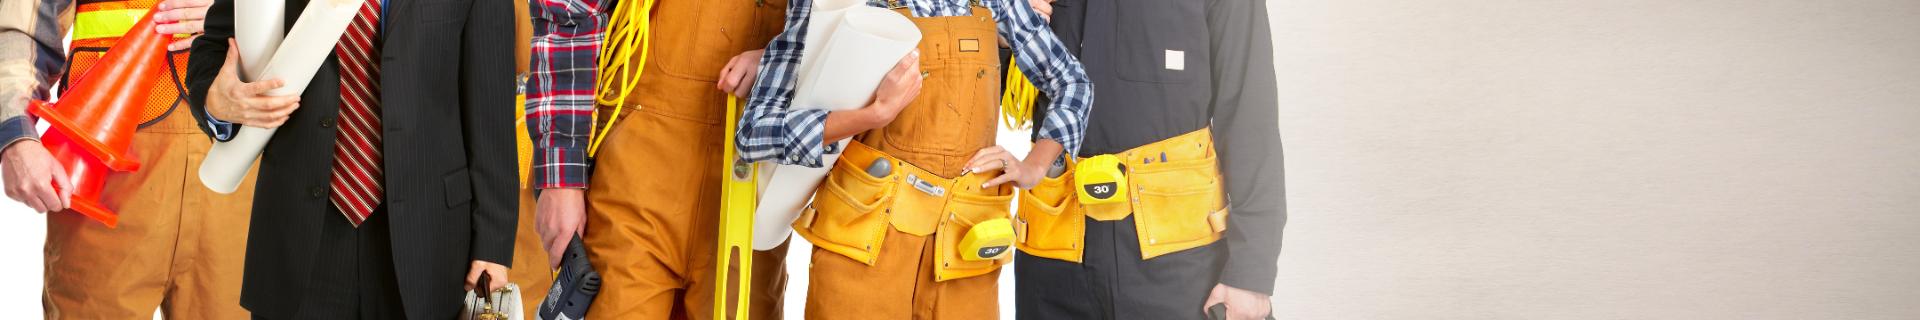 Safety and You for Construction: Encouraging Safe Work